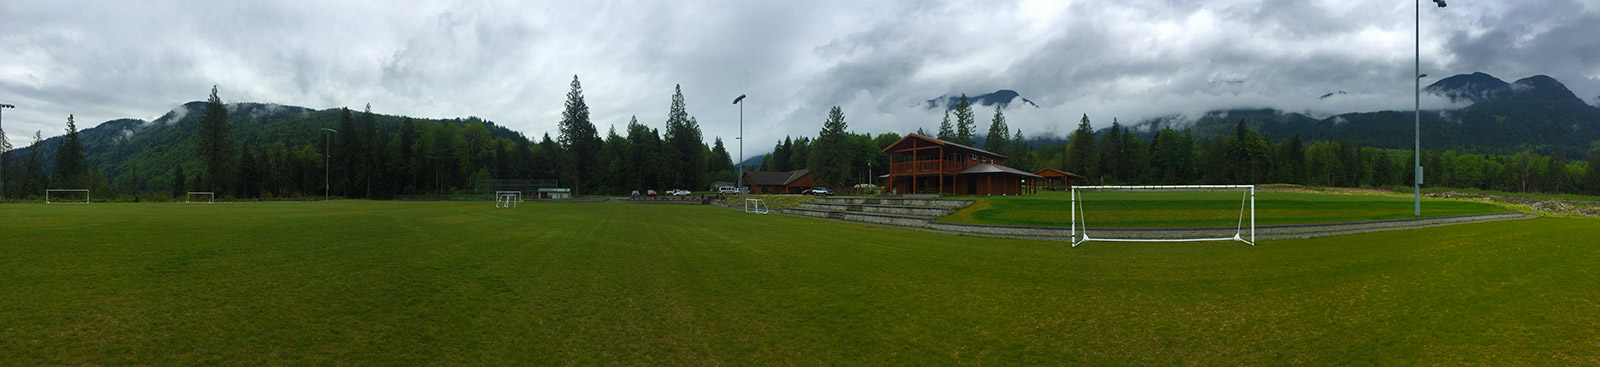 A soccer pitch is in the foreground of the image, with trees and mountains in the background. The sky above is grey and cloudy.